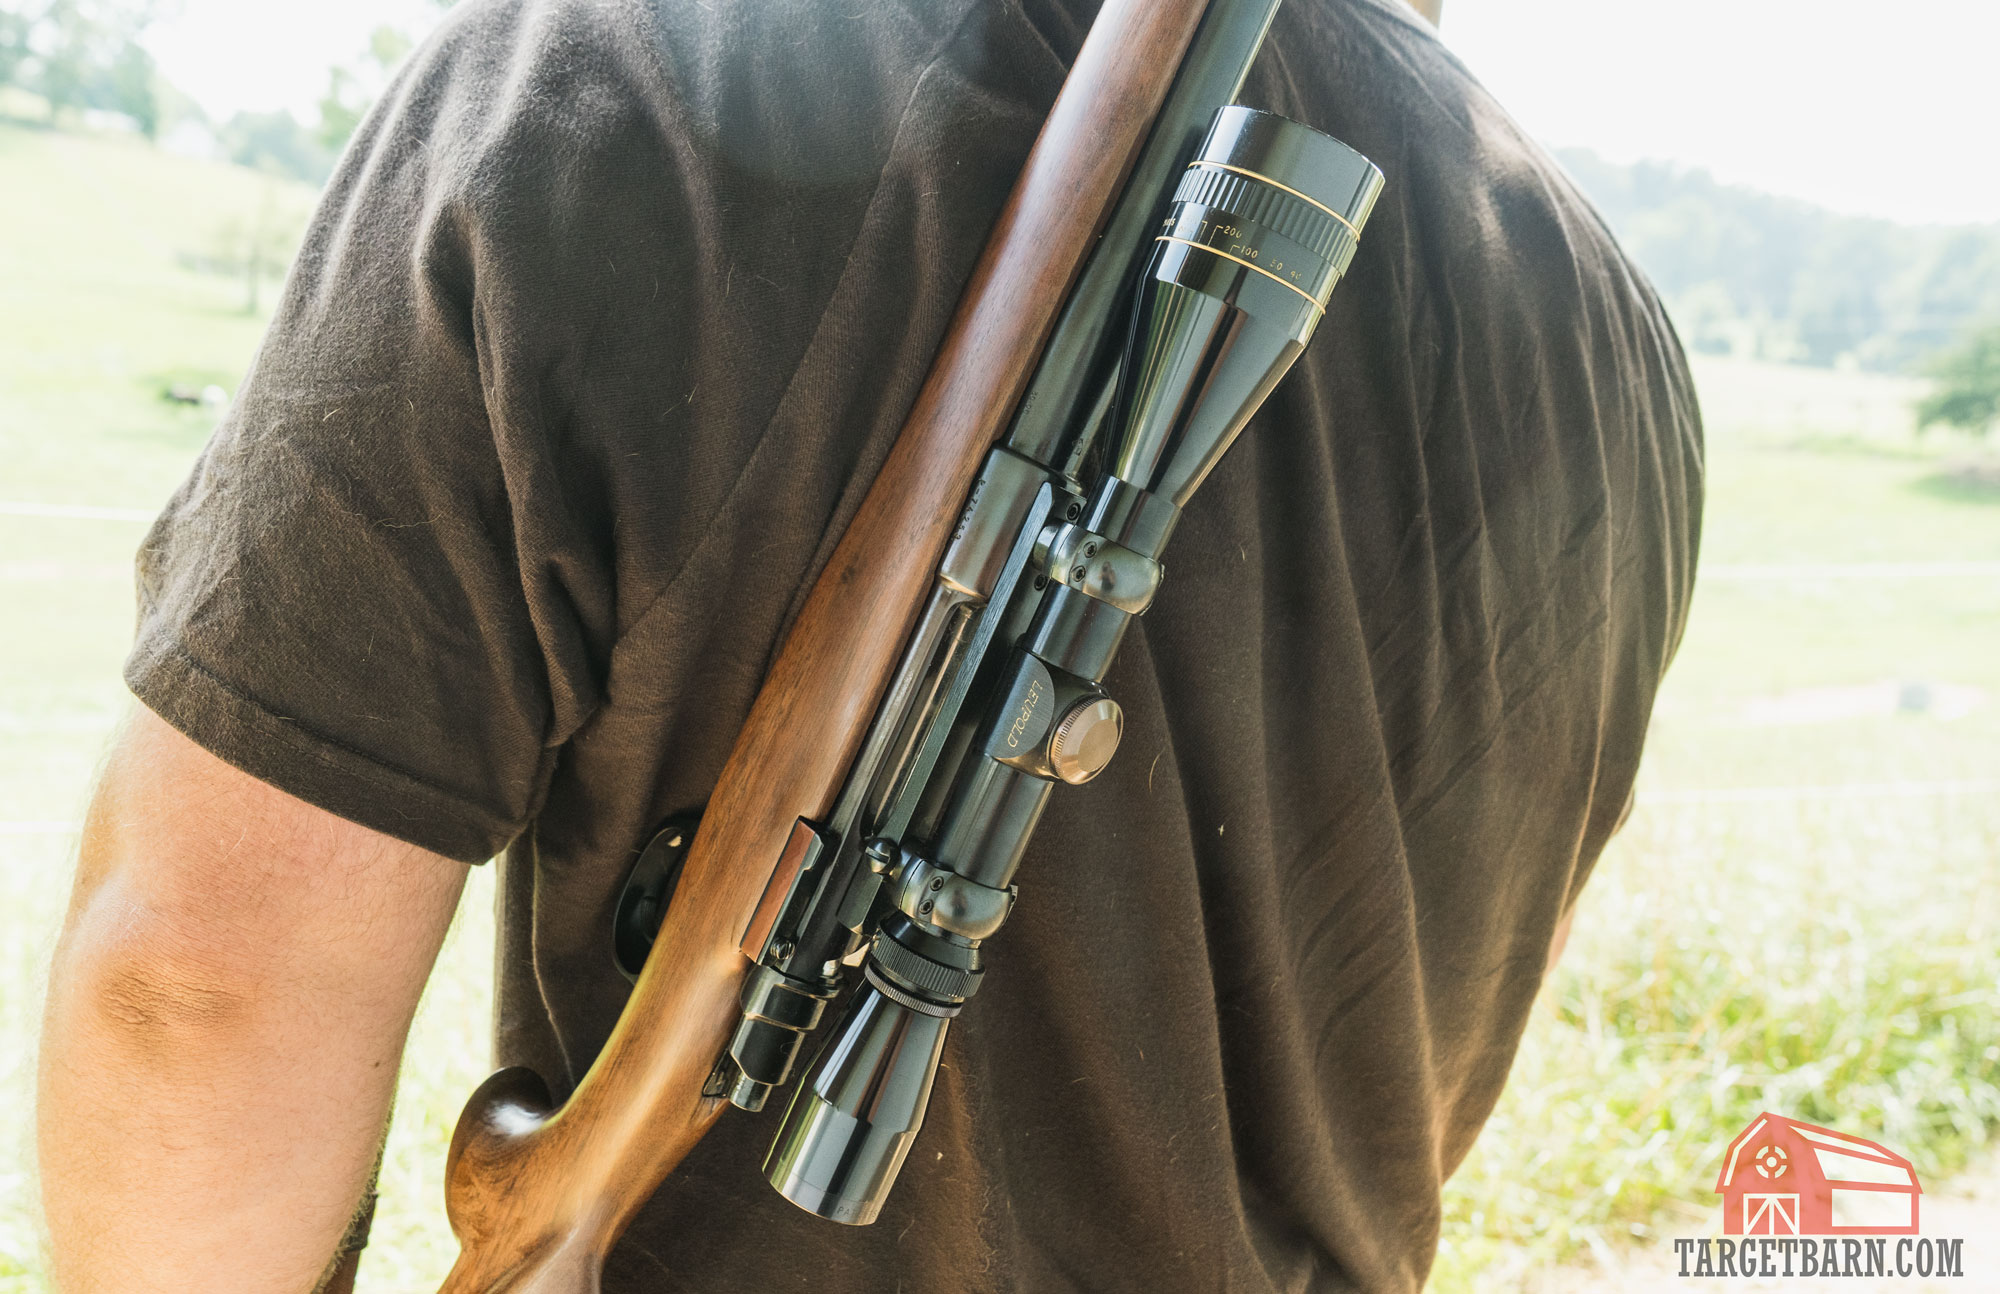 an older leupold scope on an old hunting rifle hanging over a man's shoulder